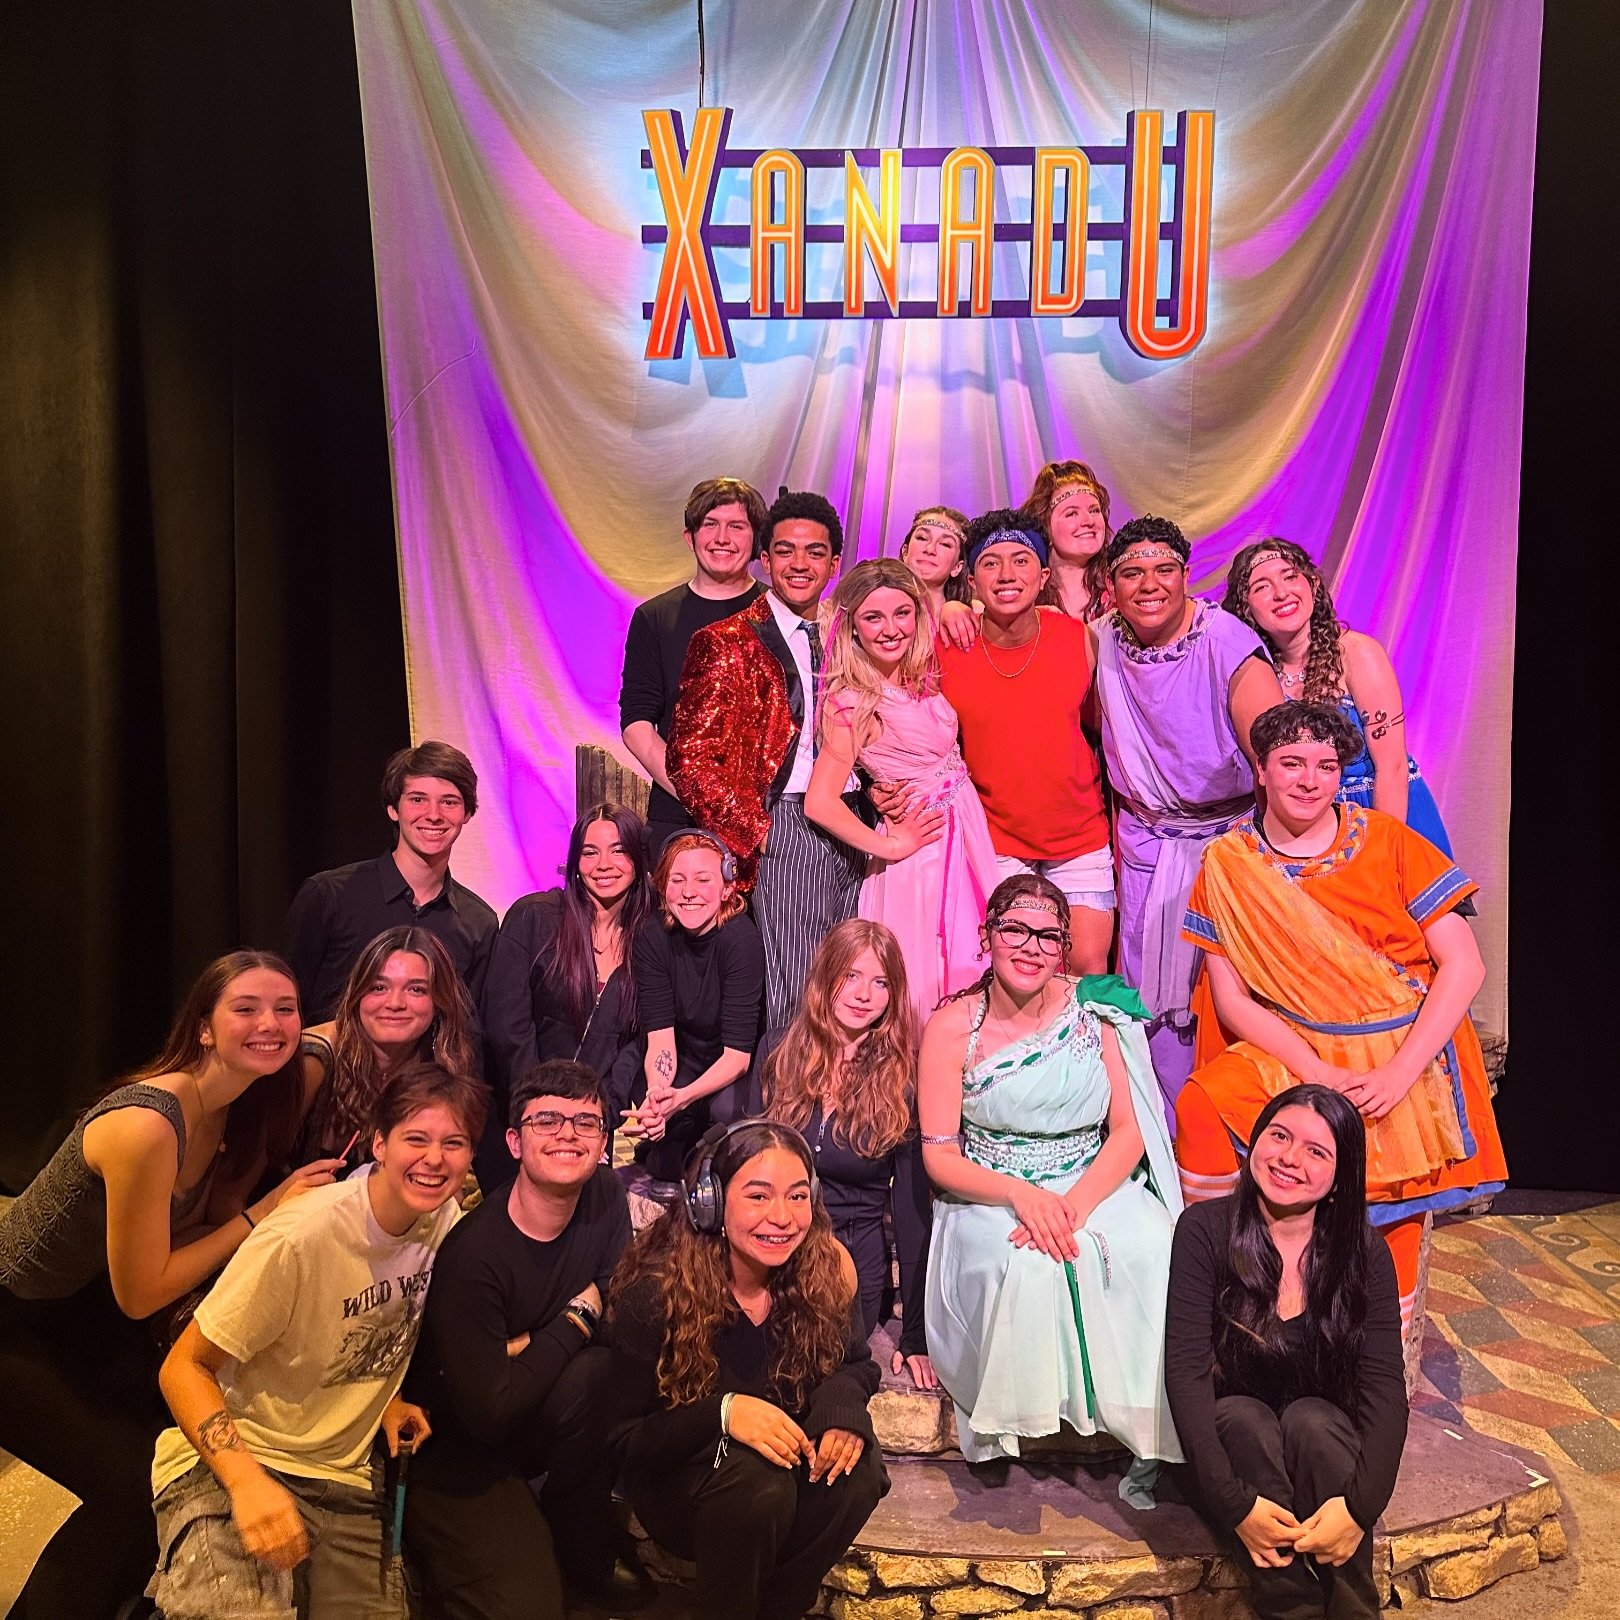 Congratulations to the cast and crew of Xanadu on a fabulous run!